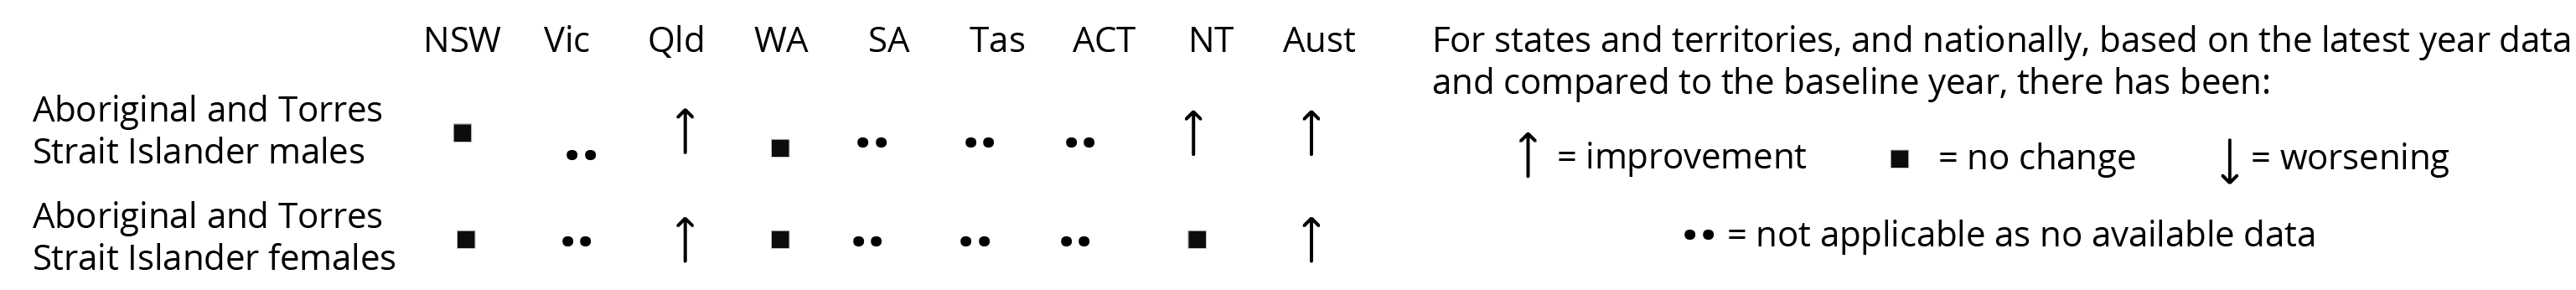 The assessment (taking into account variability in the data) indicates ‘improvement’ from the baseline years in the life expectancy of Aboriginal and Torres Strait Islander males in Queensland, the NT and nationally, with ‘no change’ in NSW and WA. 
  The assessment (taking into account variability in the data) indicates ‘improvement’ from the baseline years in the life expectancy of Aboriginal and Torres Strait Islander females in Queensland and nationally, while there was ‘no change’ in NSW, WA and the NT. 
  Life expectancy data for Aboriginal and Torres Strait Islander people are not available for Victoria, SA, Tasmania and the ACT.
  